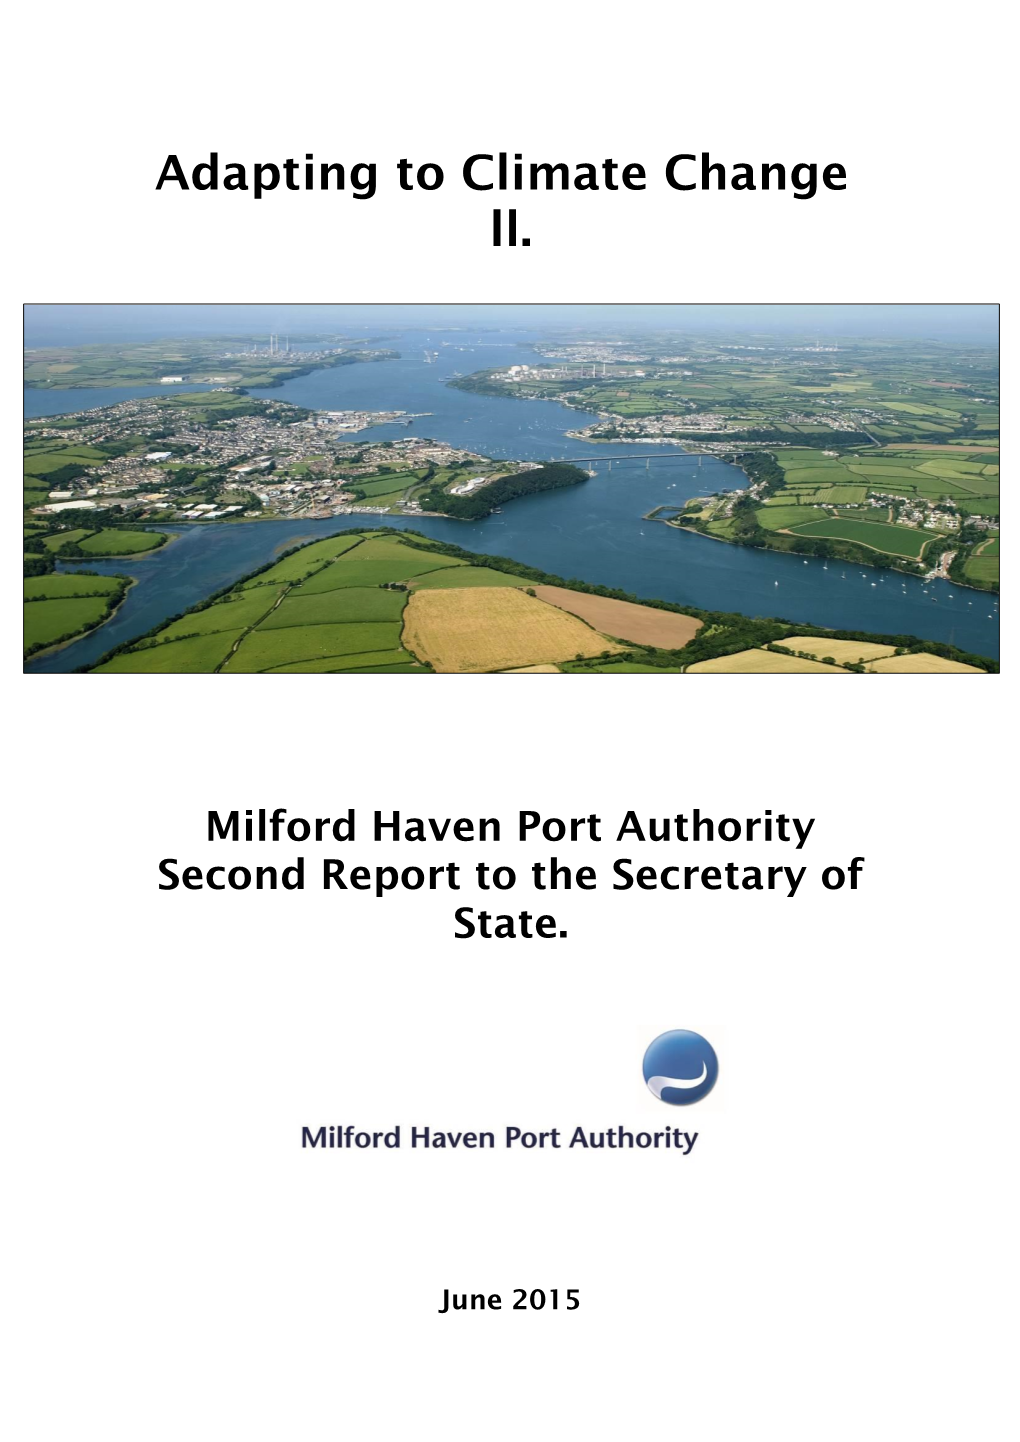 MHPA Climate Change Adaptation Report to Defra